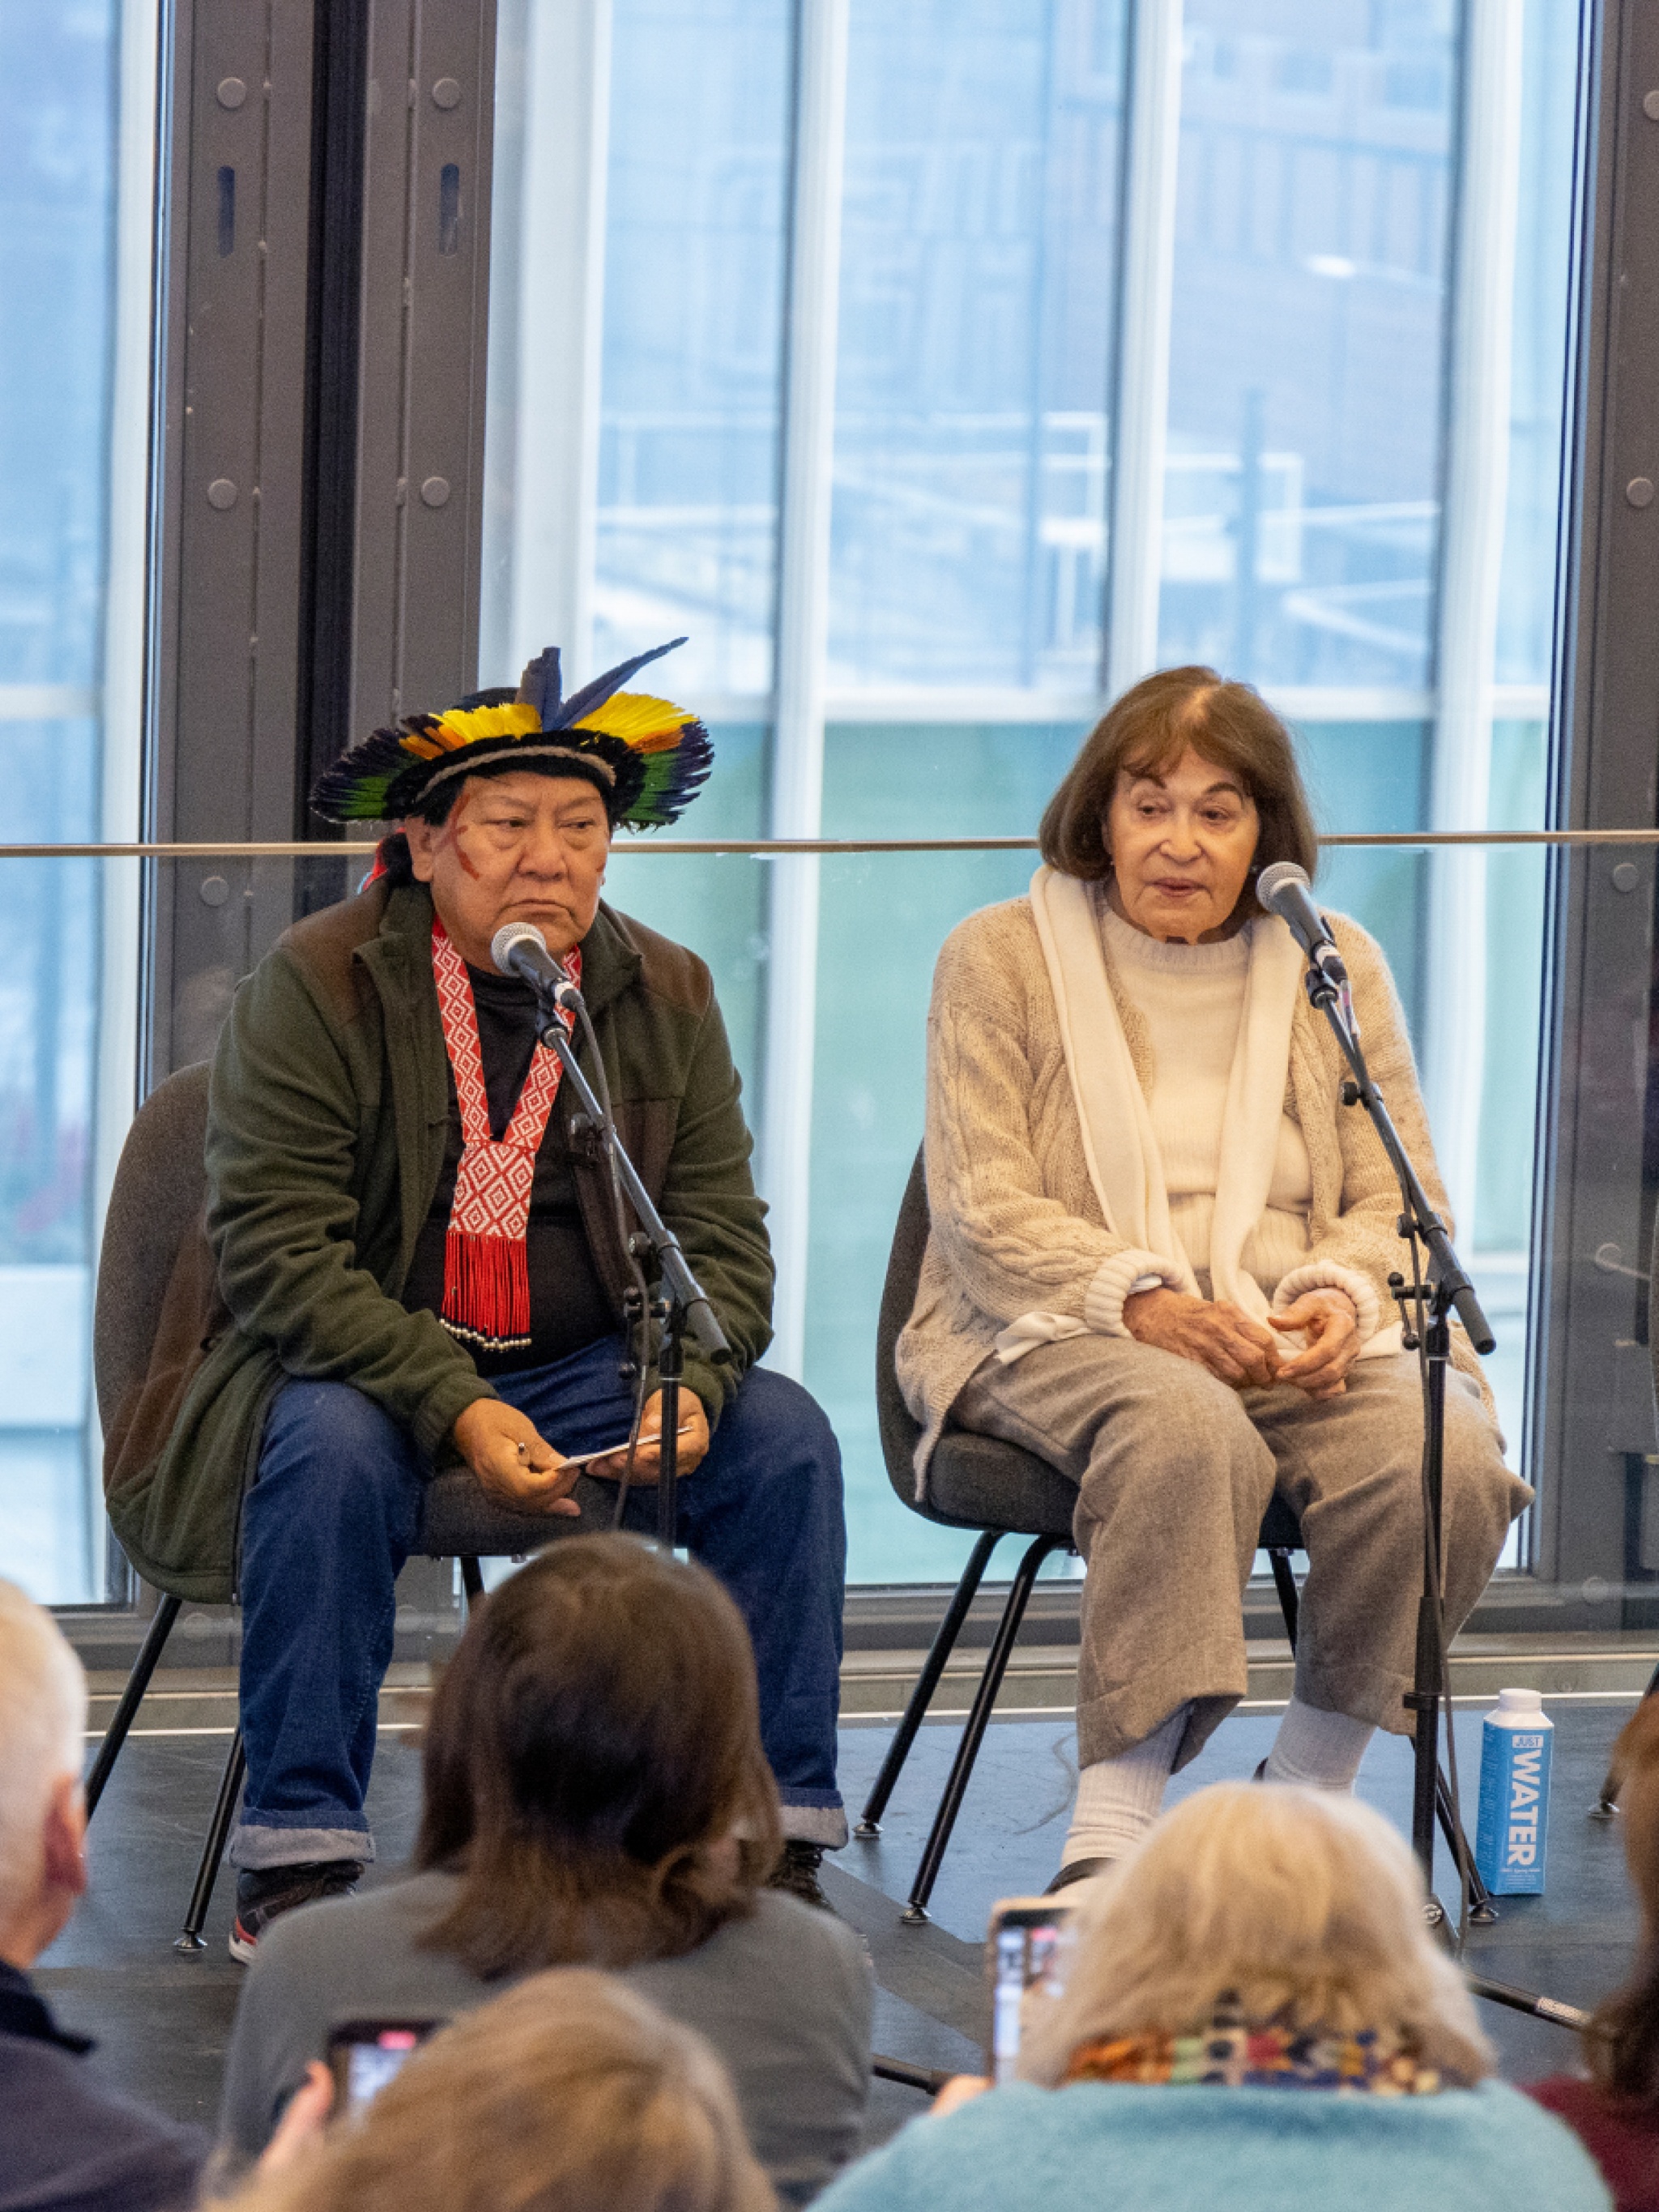 Two panelists sit on a stage with large windows behind them. On the left, is Davi Kopenawa, a Yanomami man who wears a head dress made of colorful feathers. On the right of him sits artist Claudia Andujar, a Brazilian white woman with brown hair wearing an off white outfit.